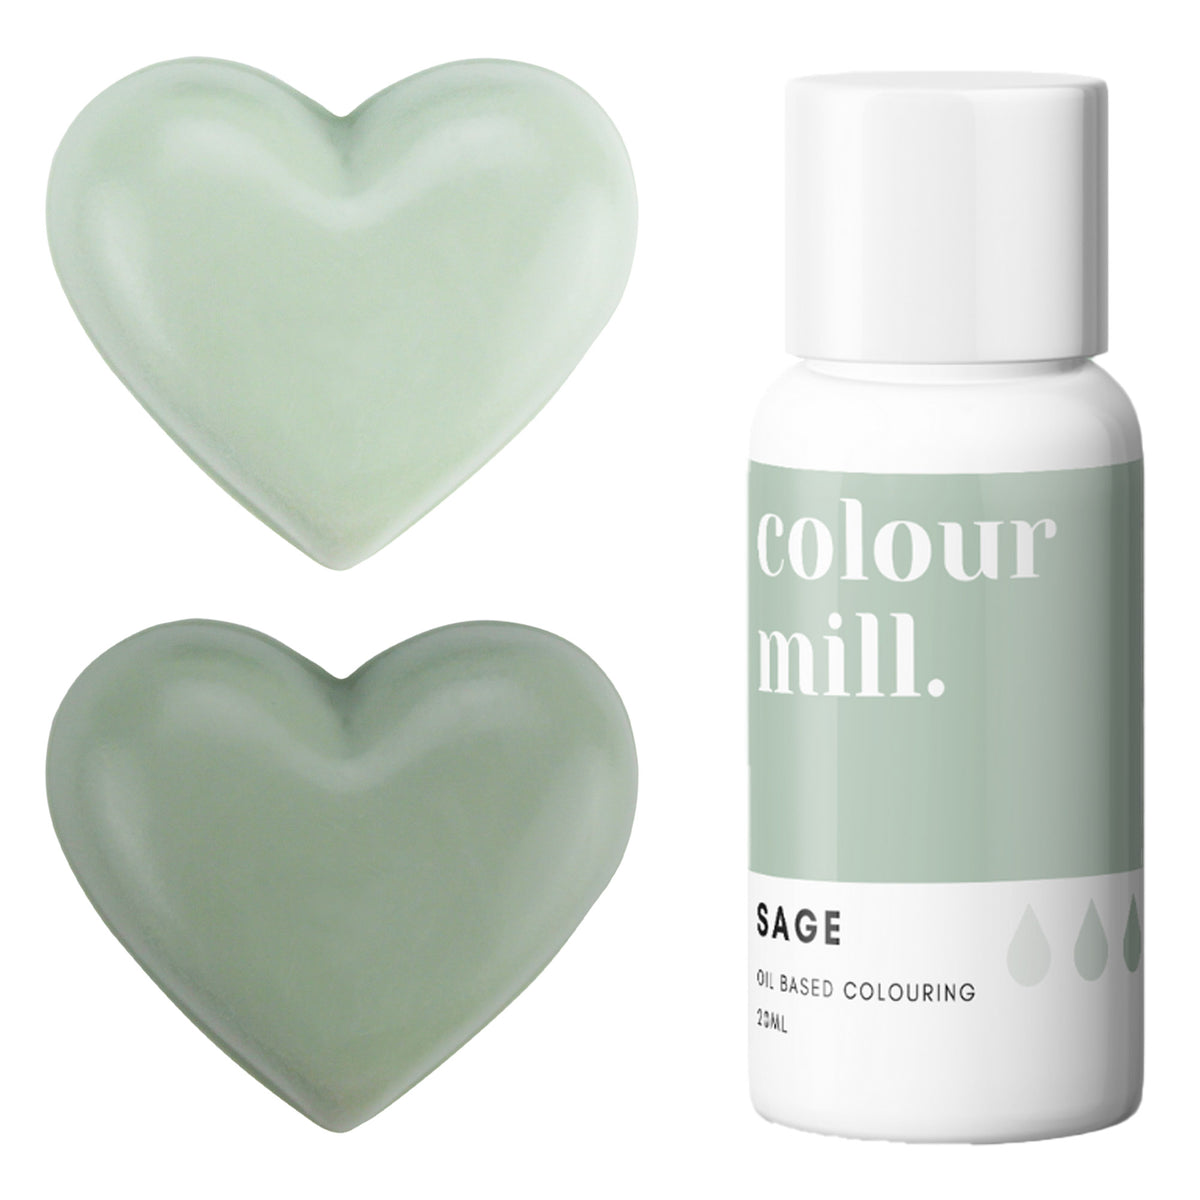 Sage Colour Mill Oil Based Food Coloring